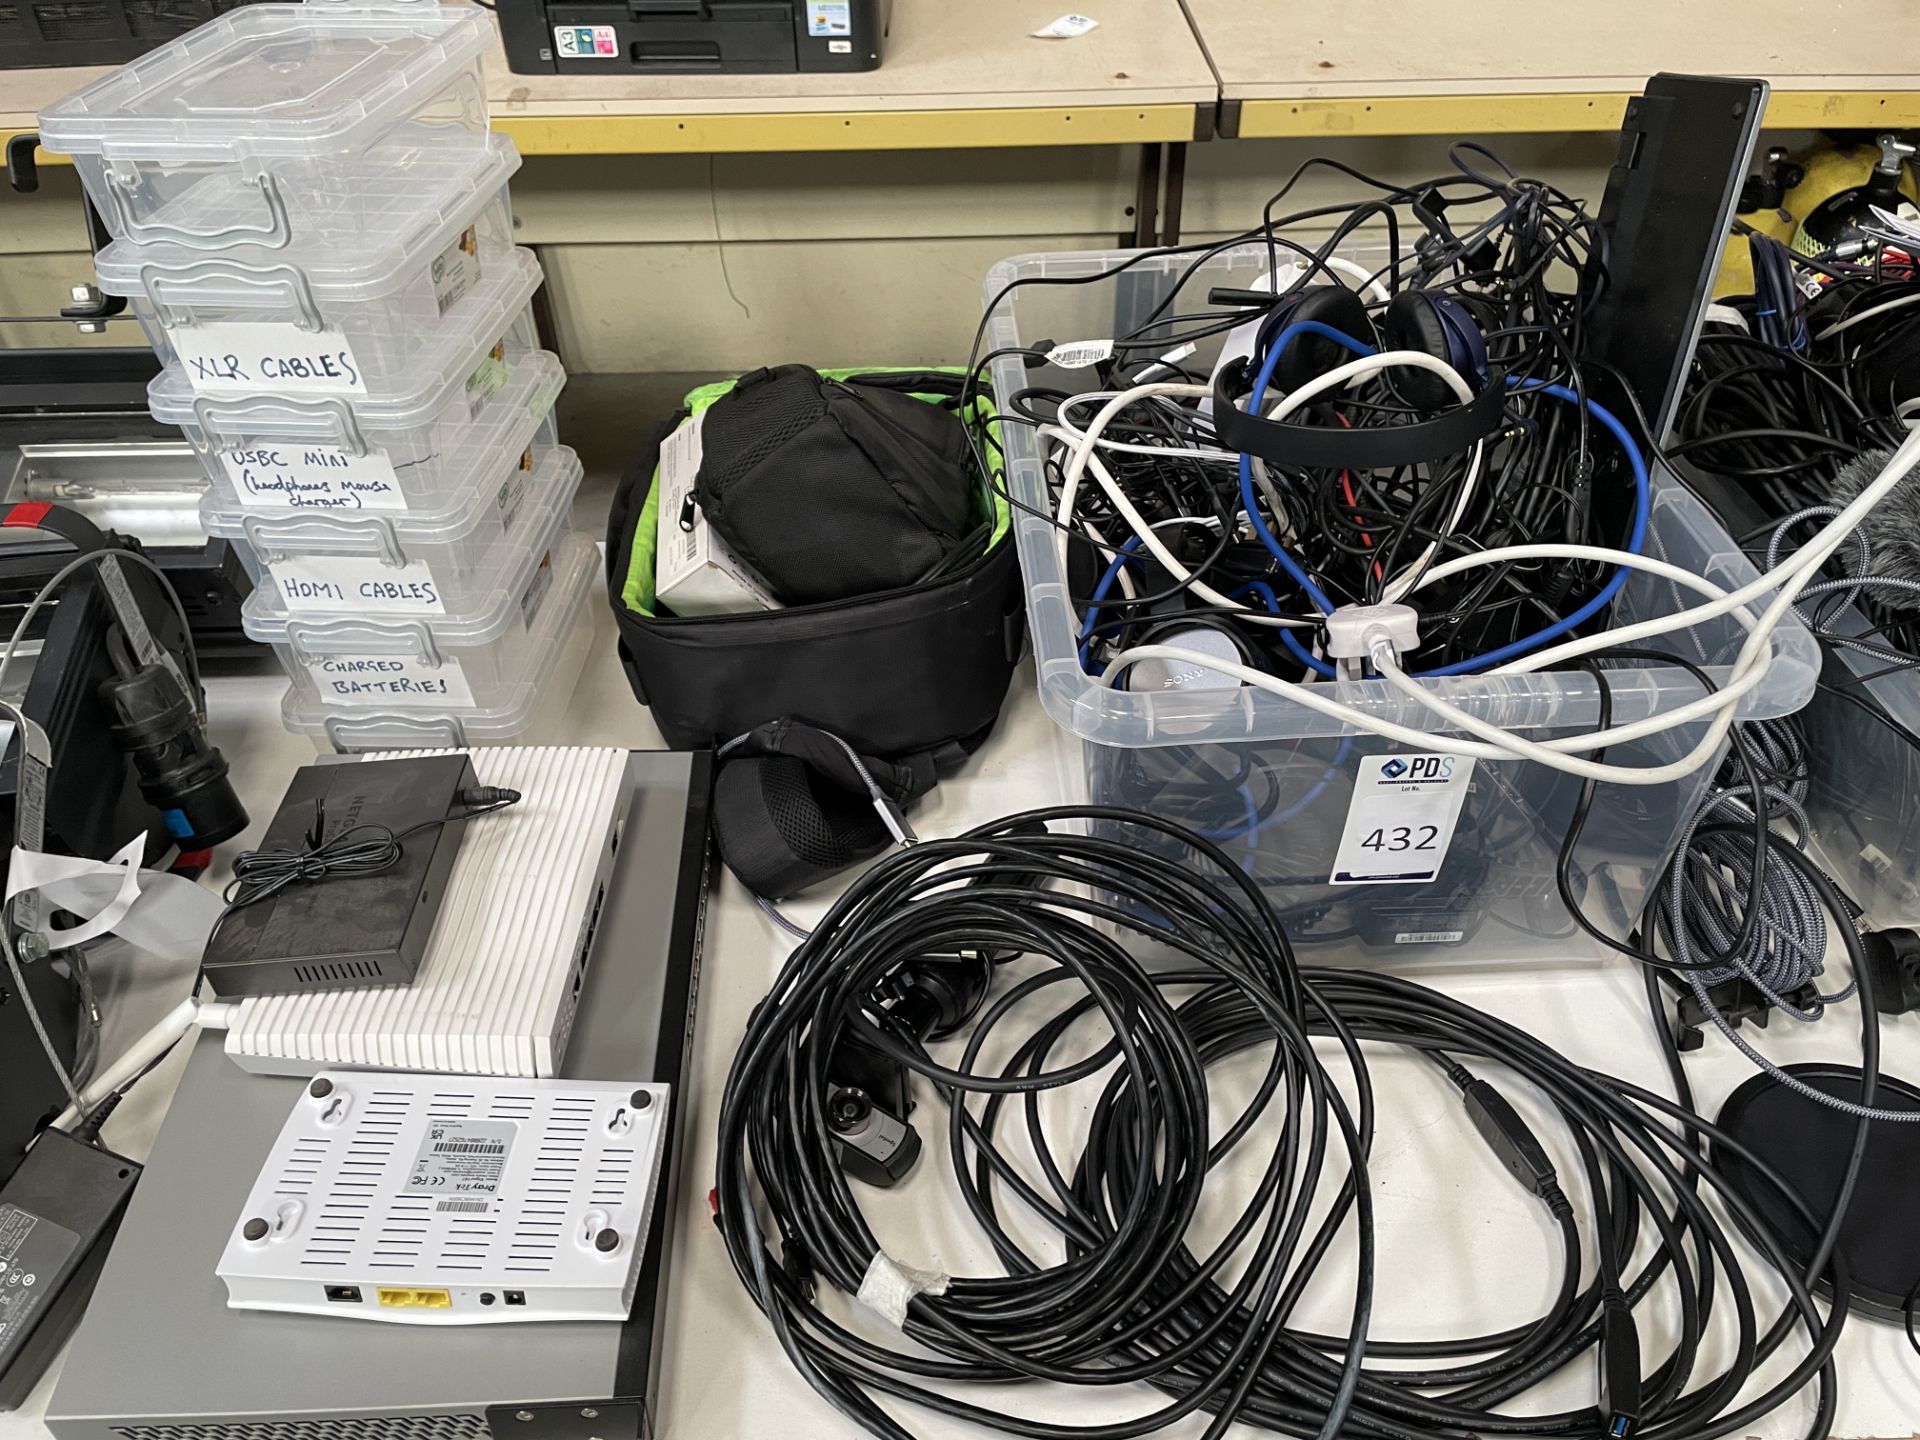 Quantity of Various Audio Visual Equipment including Cables, Speakers, Pop Filters, Headphones, Dead - Image 3 of 3